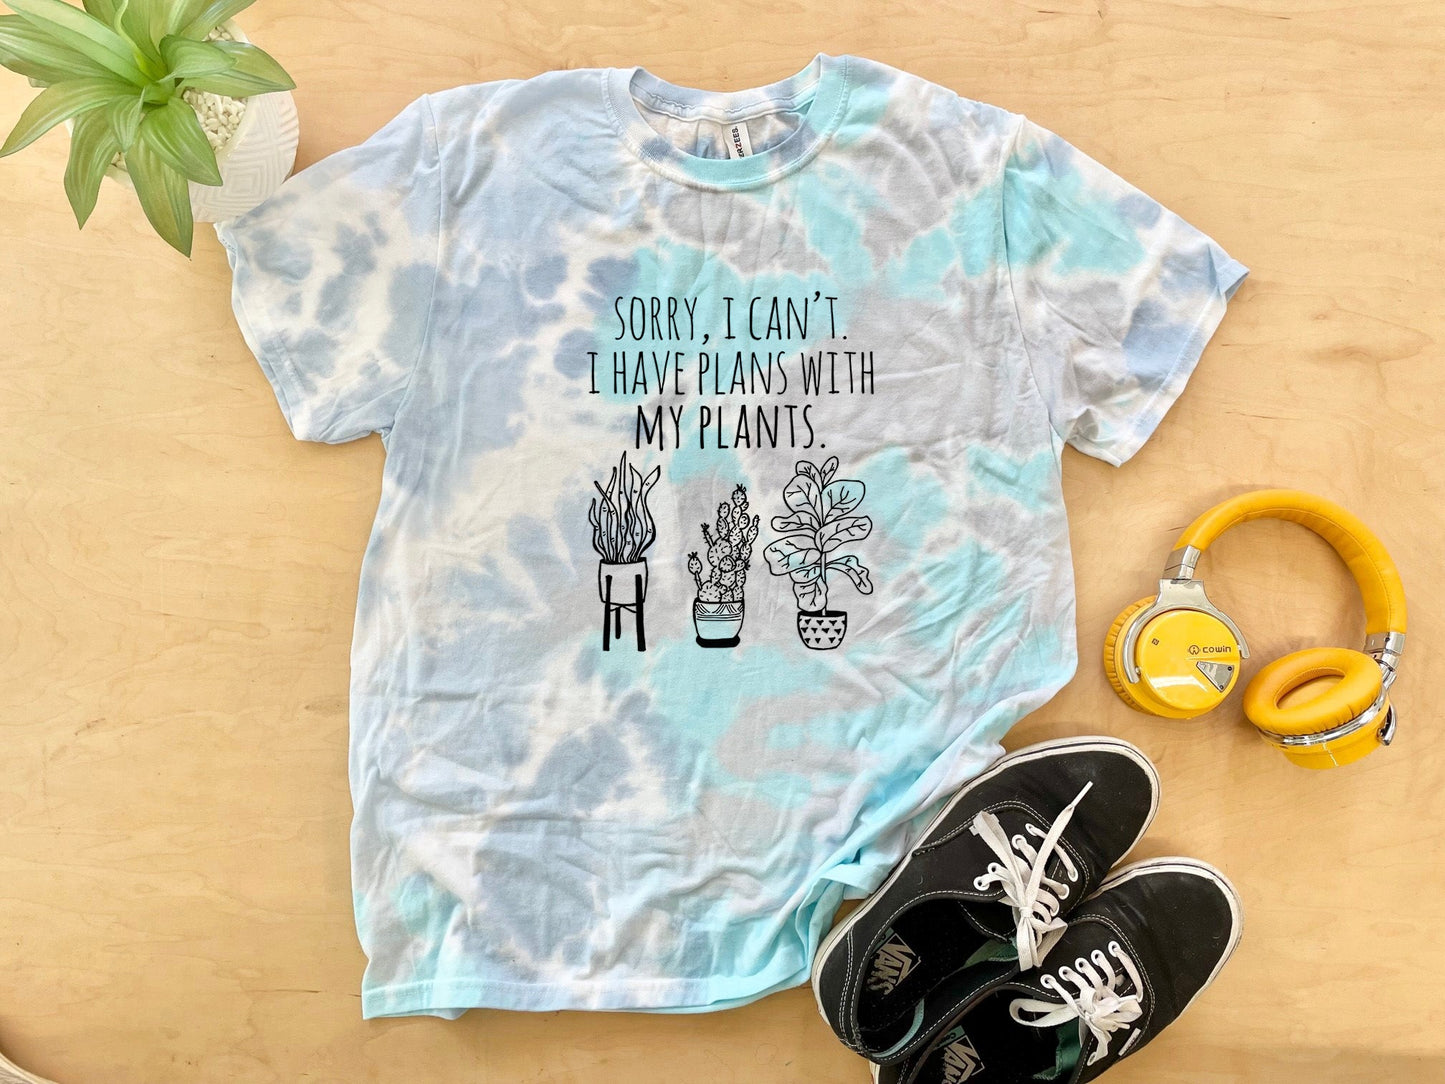 Sorry, I Can't. I Have Plans With My Plants - Mens/Unisex Tie Dye Tee - Blue